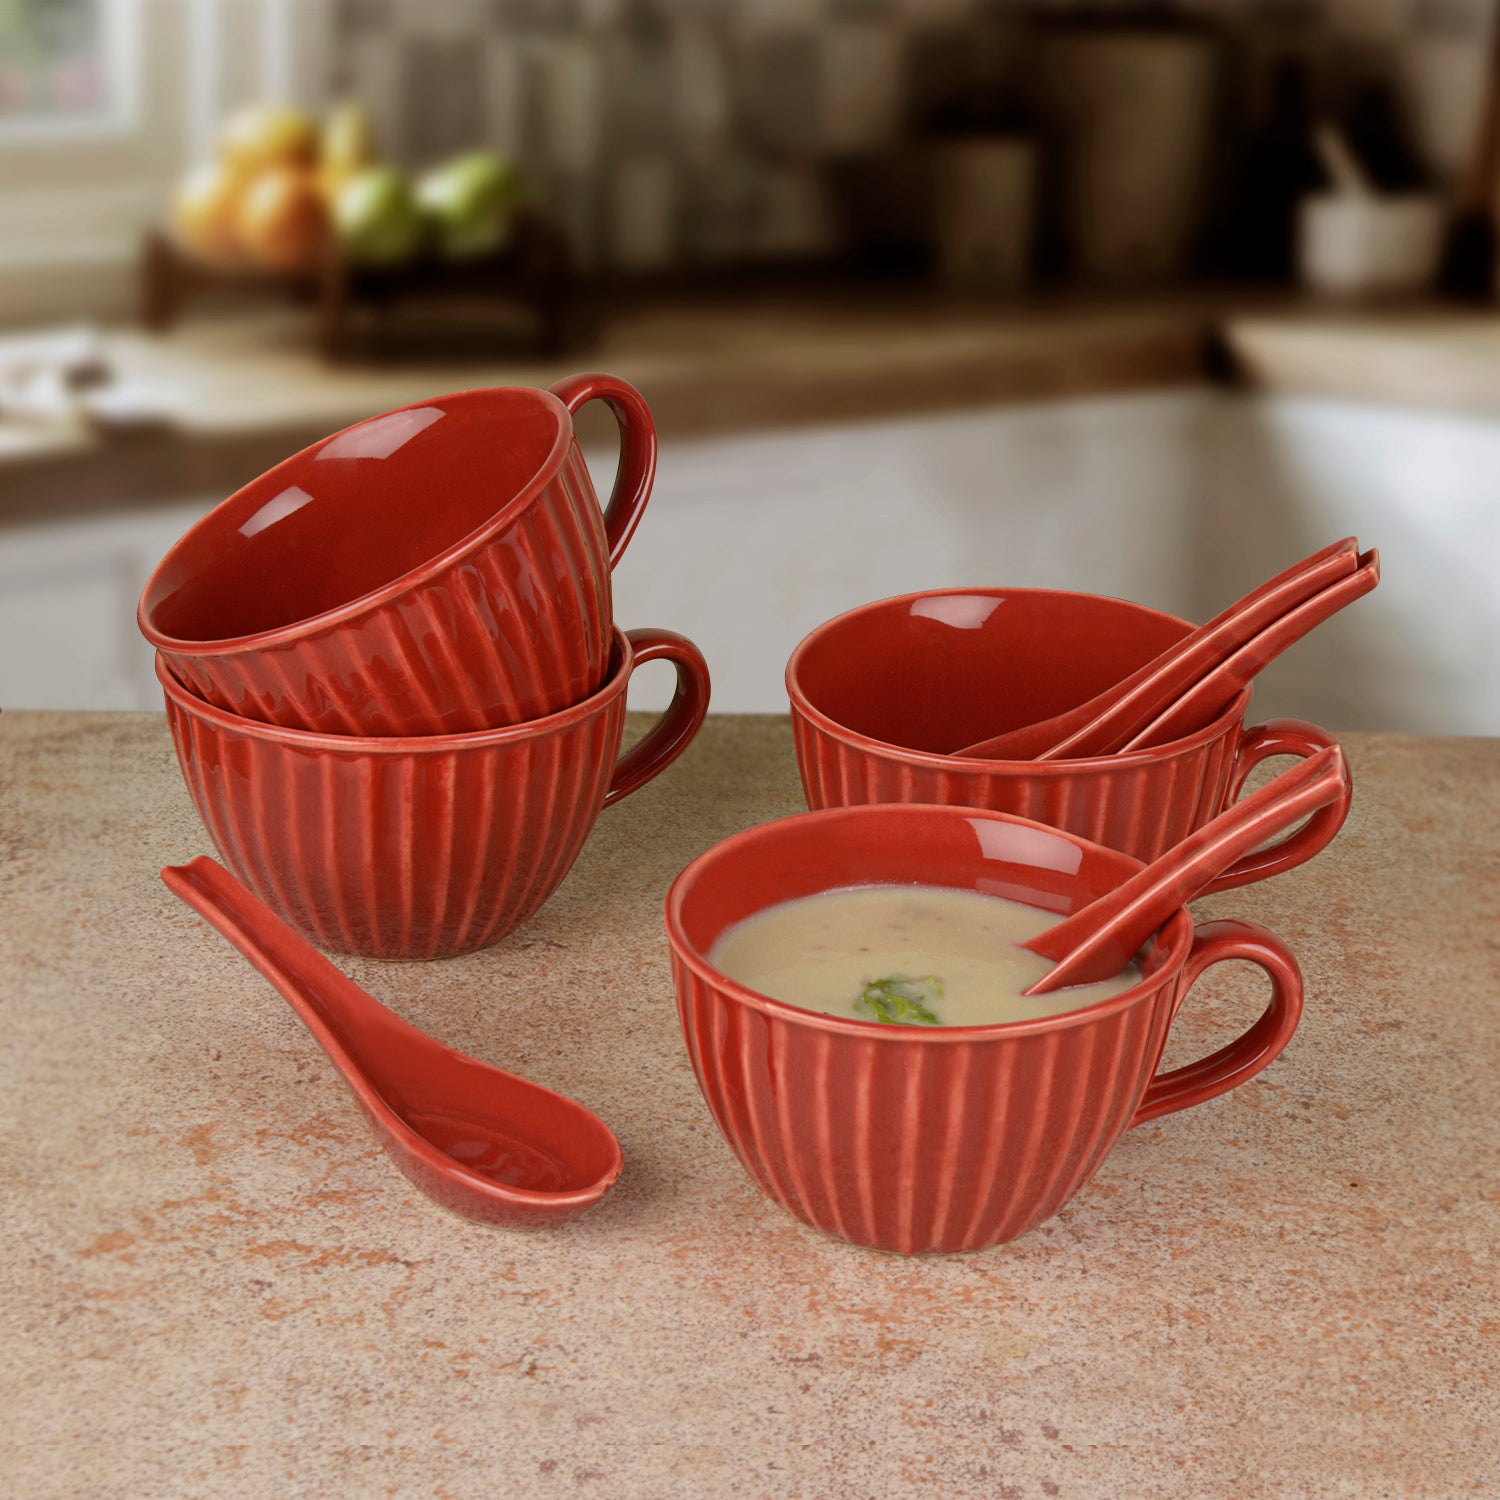 Ceramic Soup Cup with Spoon